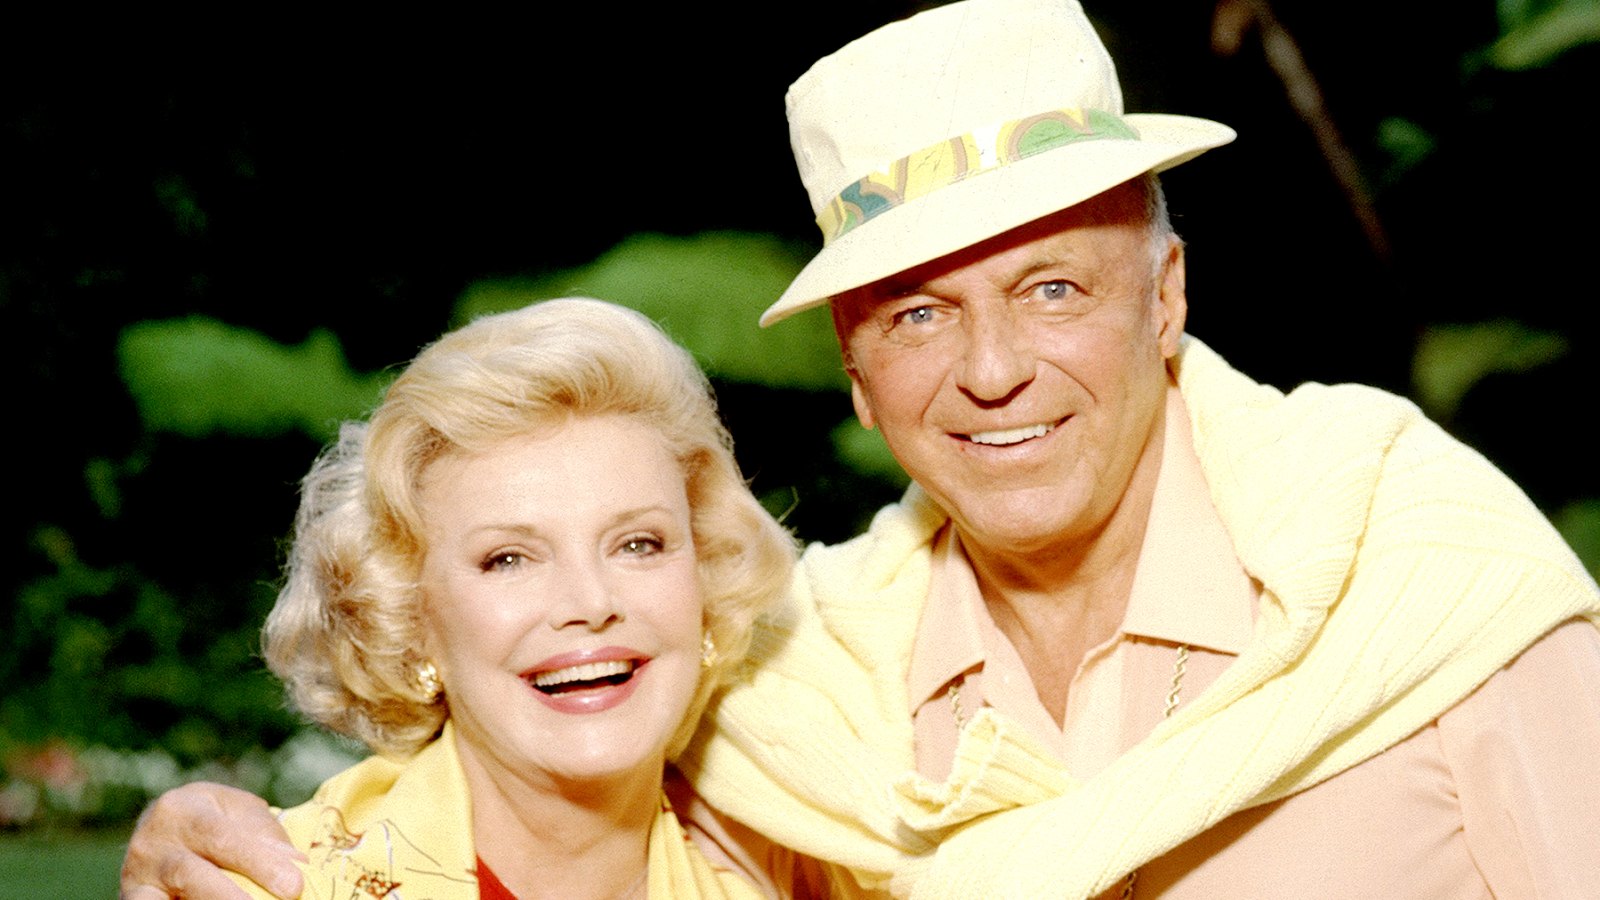 Frank Sinatra and Barbara Sinatra pose for a portrait in Los Angeles in 1990.